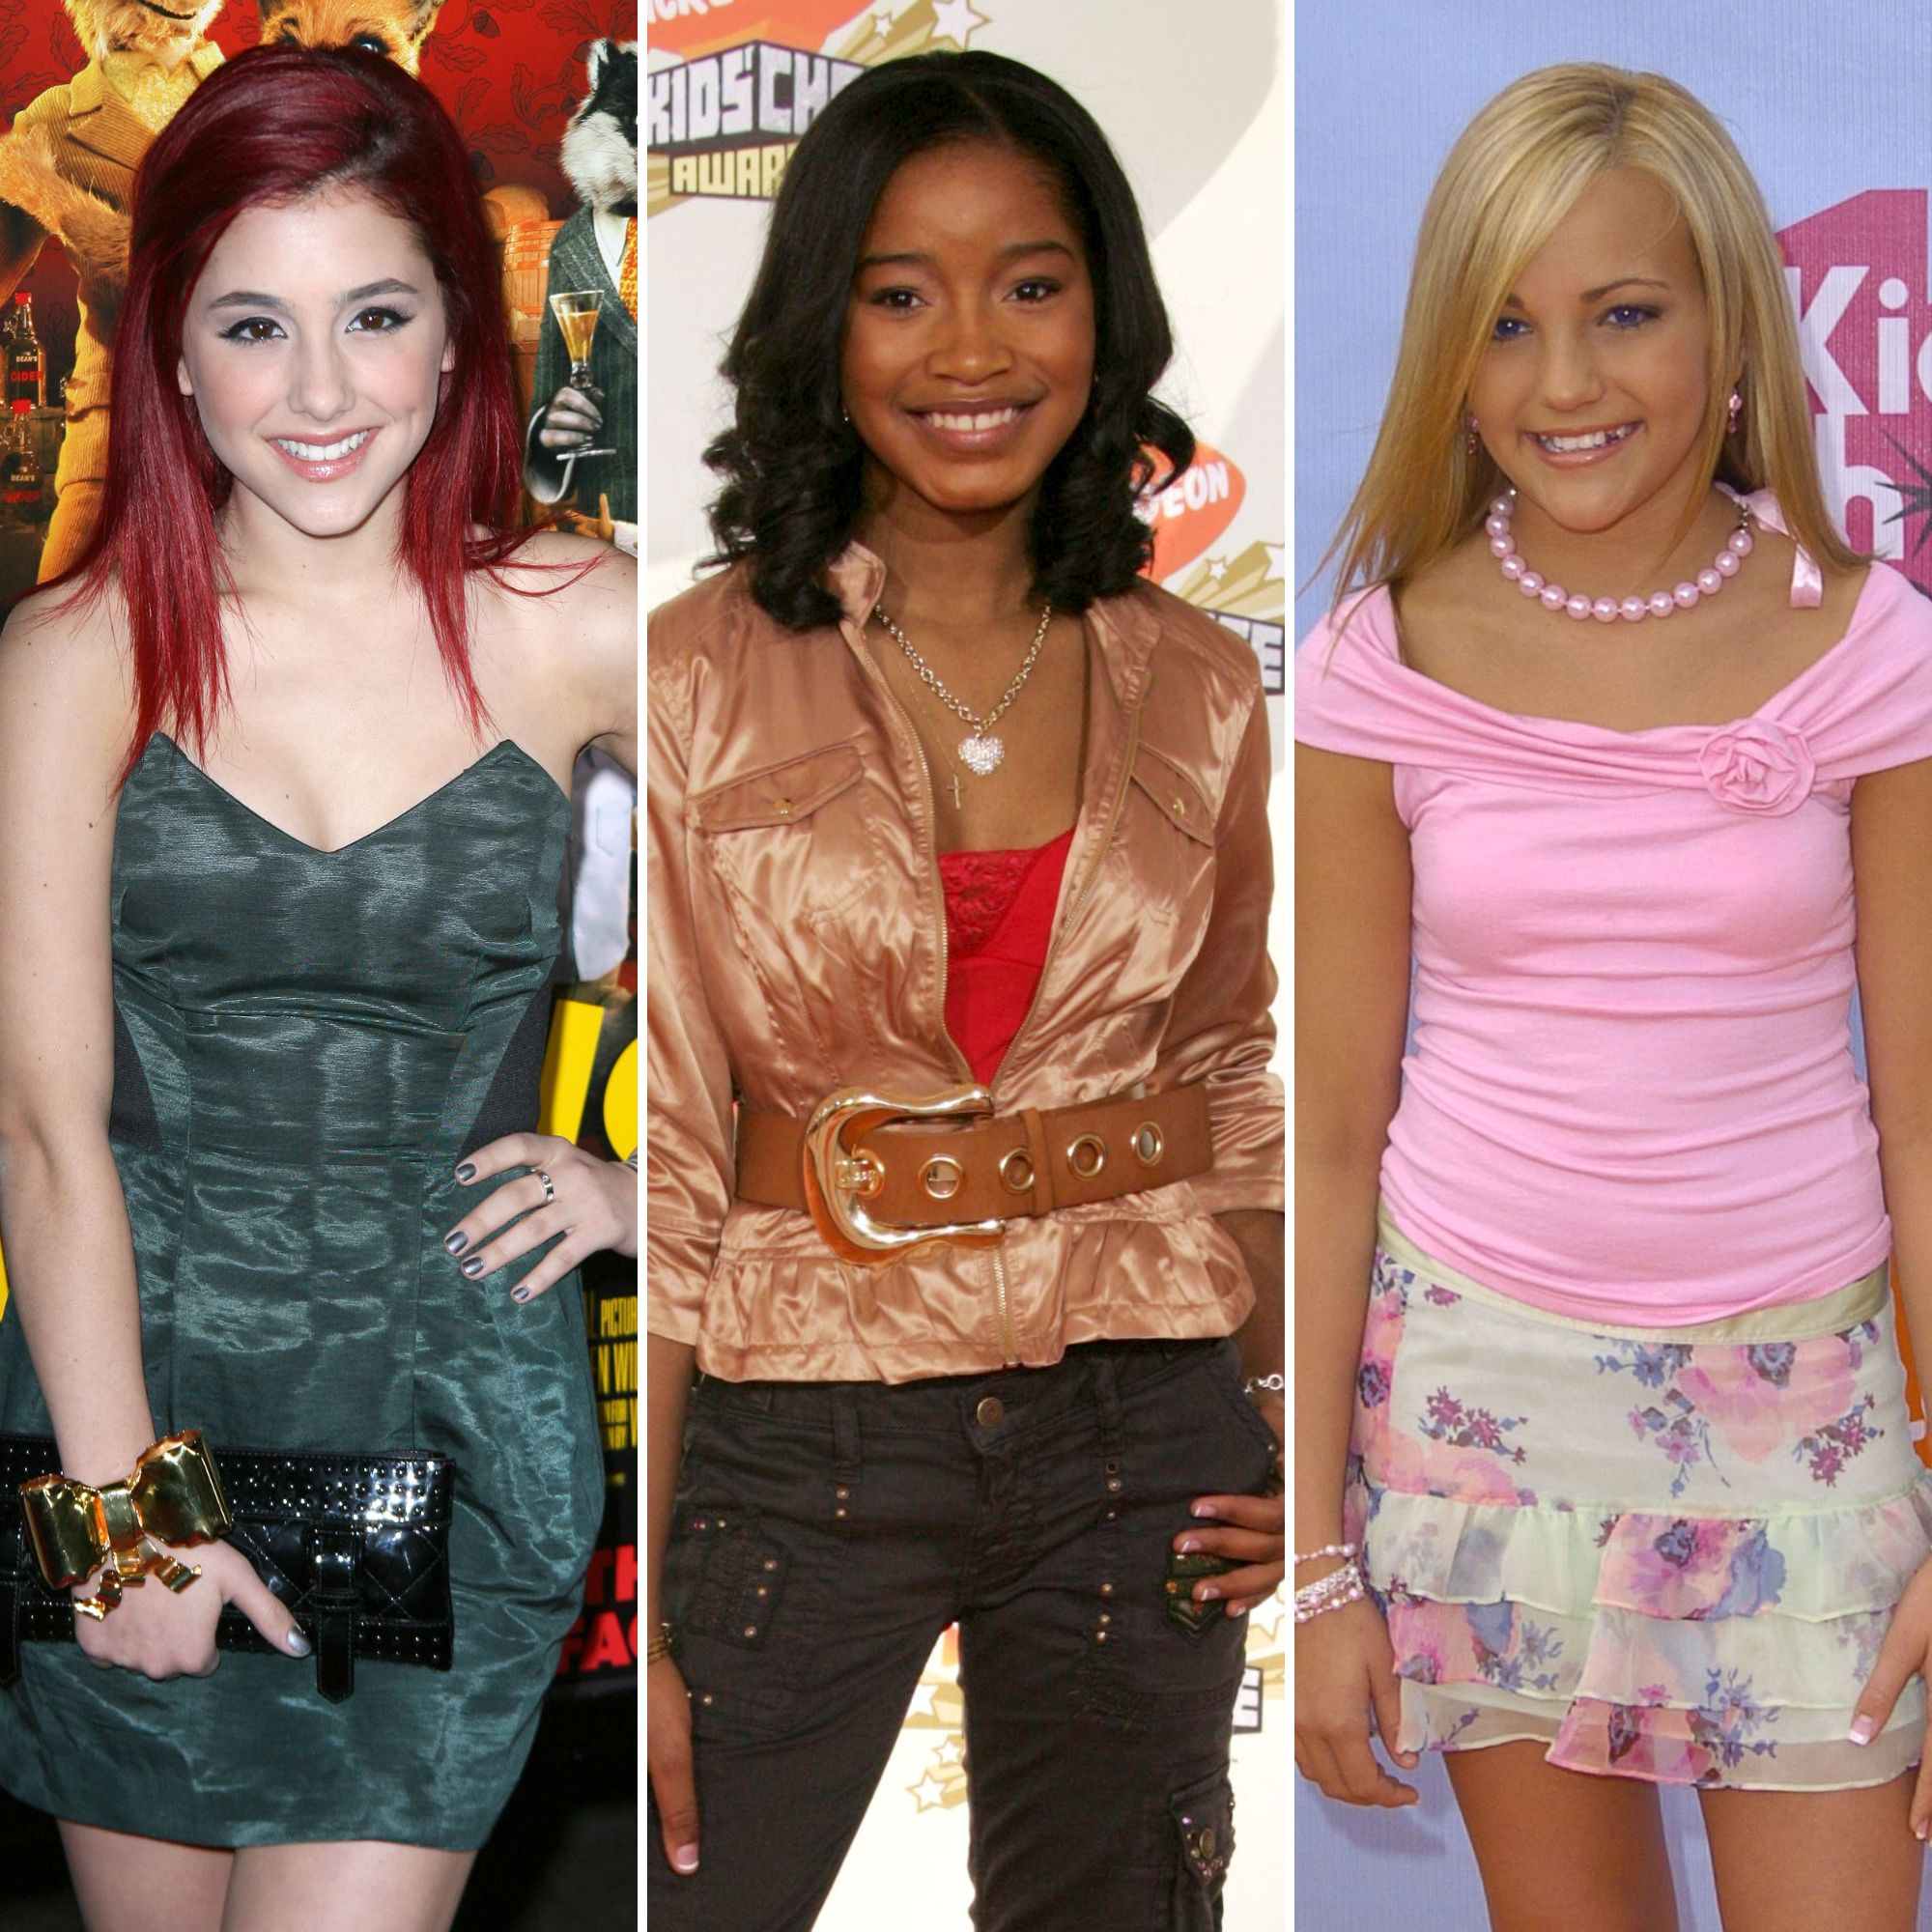 Nickelodeon Girls Who Look Different: Then-And-Now Pics